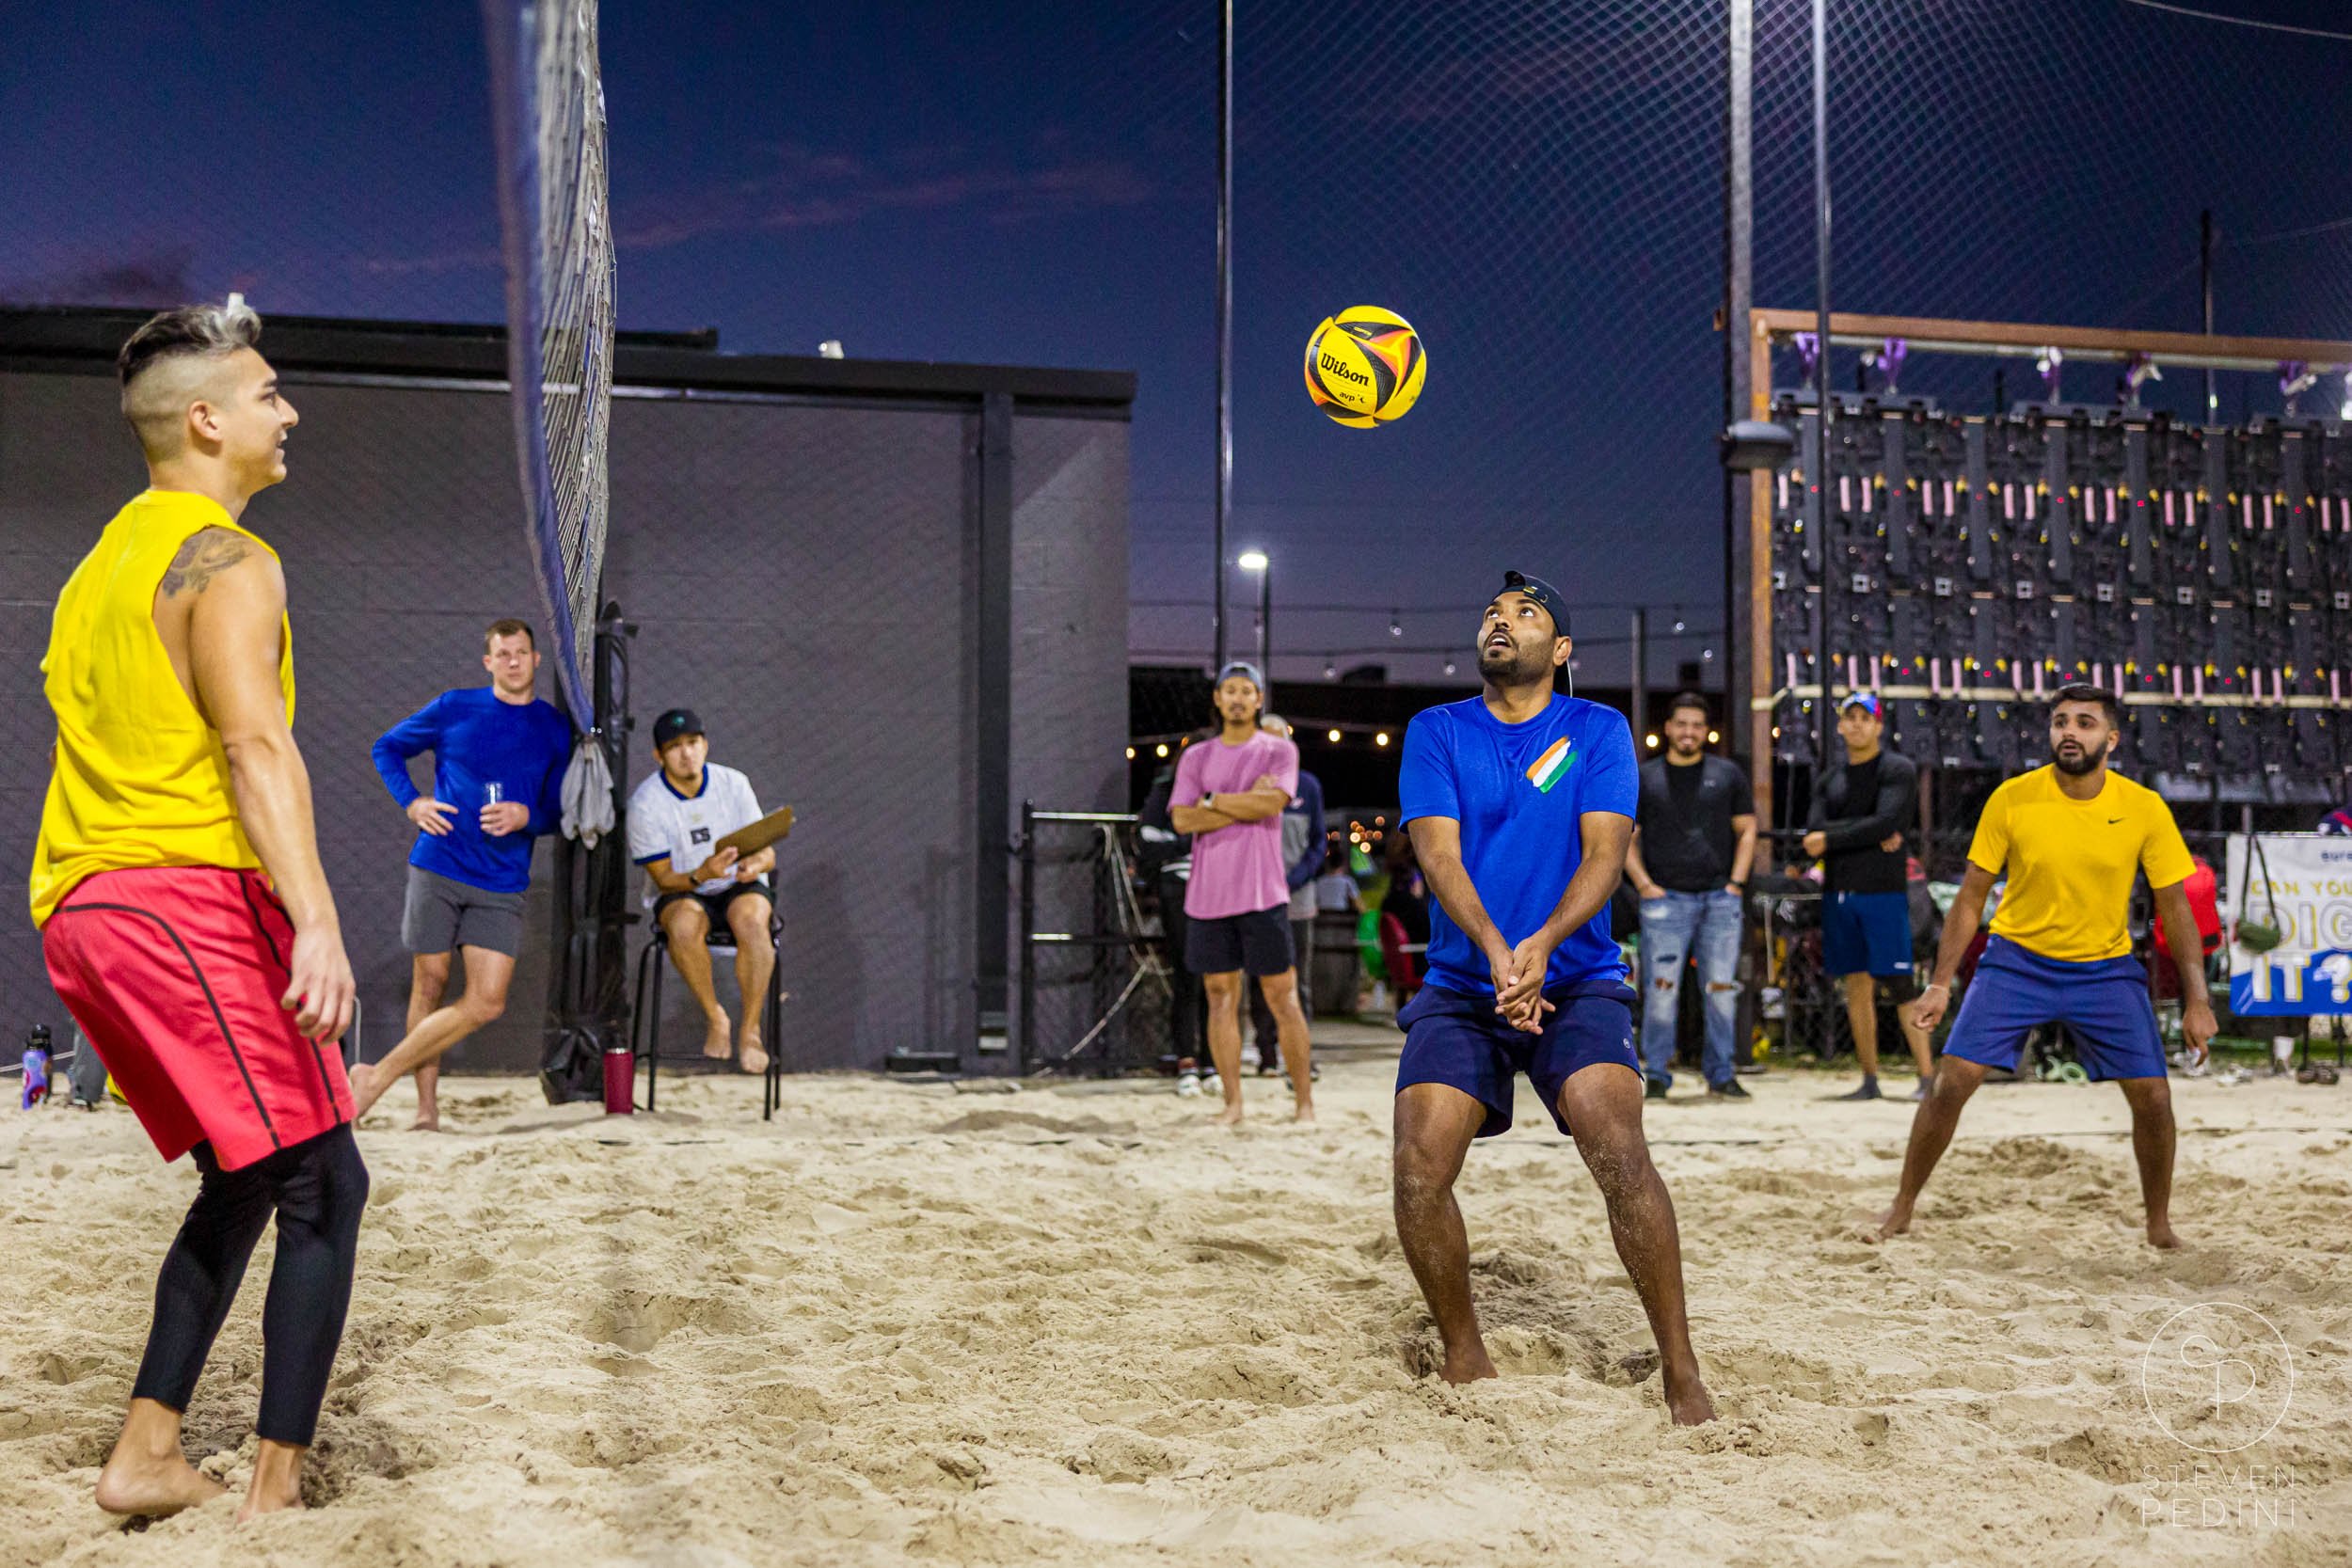 Steven Pedini Photography - Bumpy Pickle - Sand Volleyball - Houston TX - World Cup of Volleyball - 00348.jpg